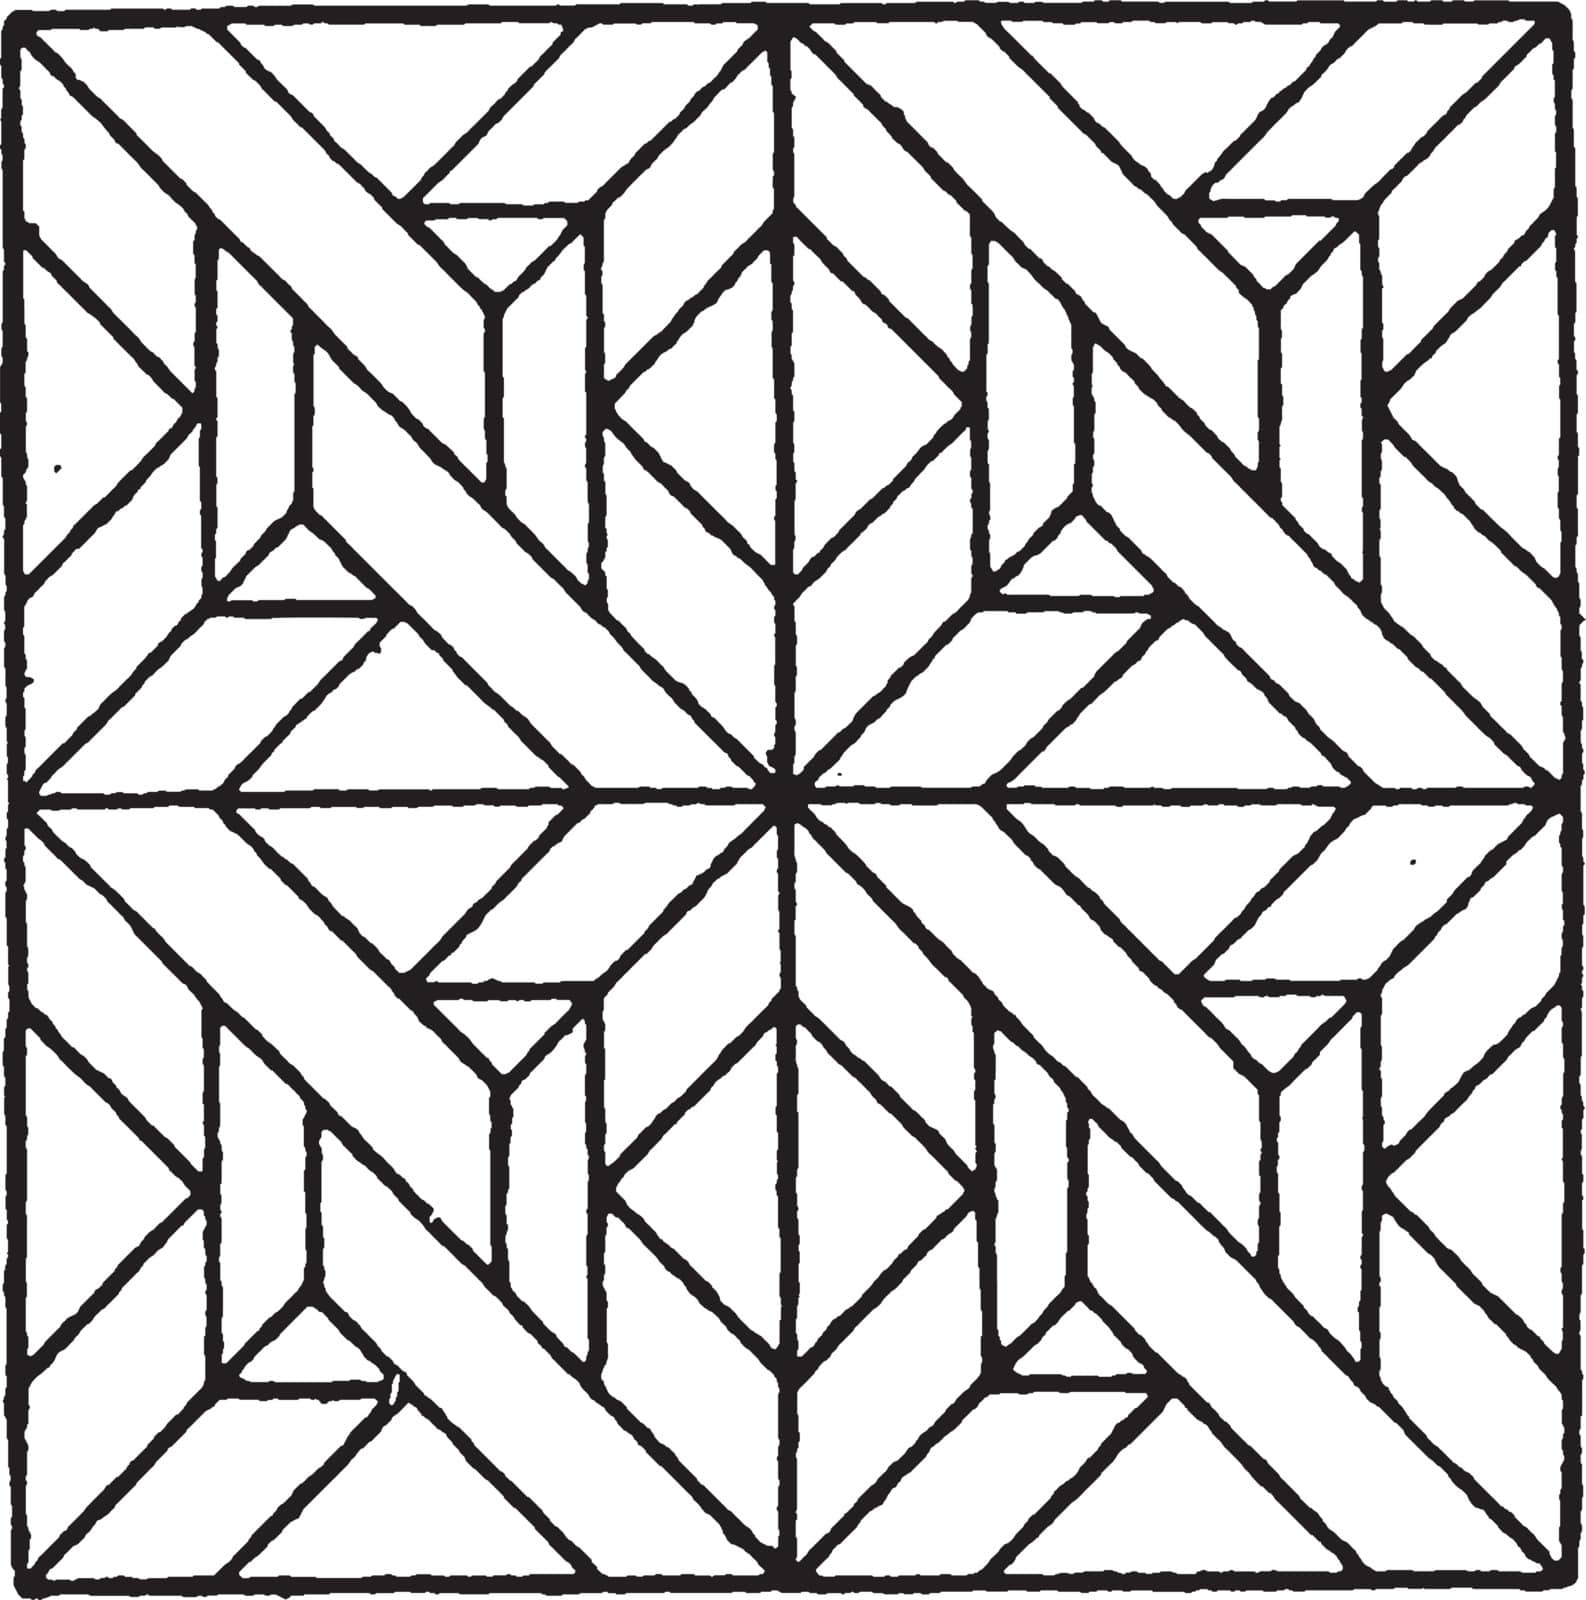 Modern Square Panel is a Geometric modern mosaic, vintage line drawing or engraving illustration.